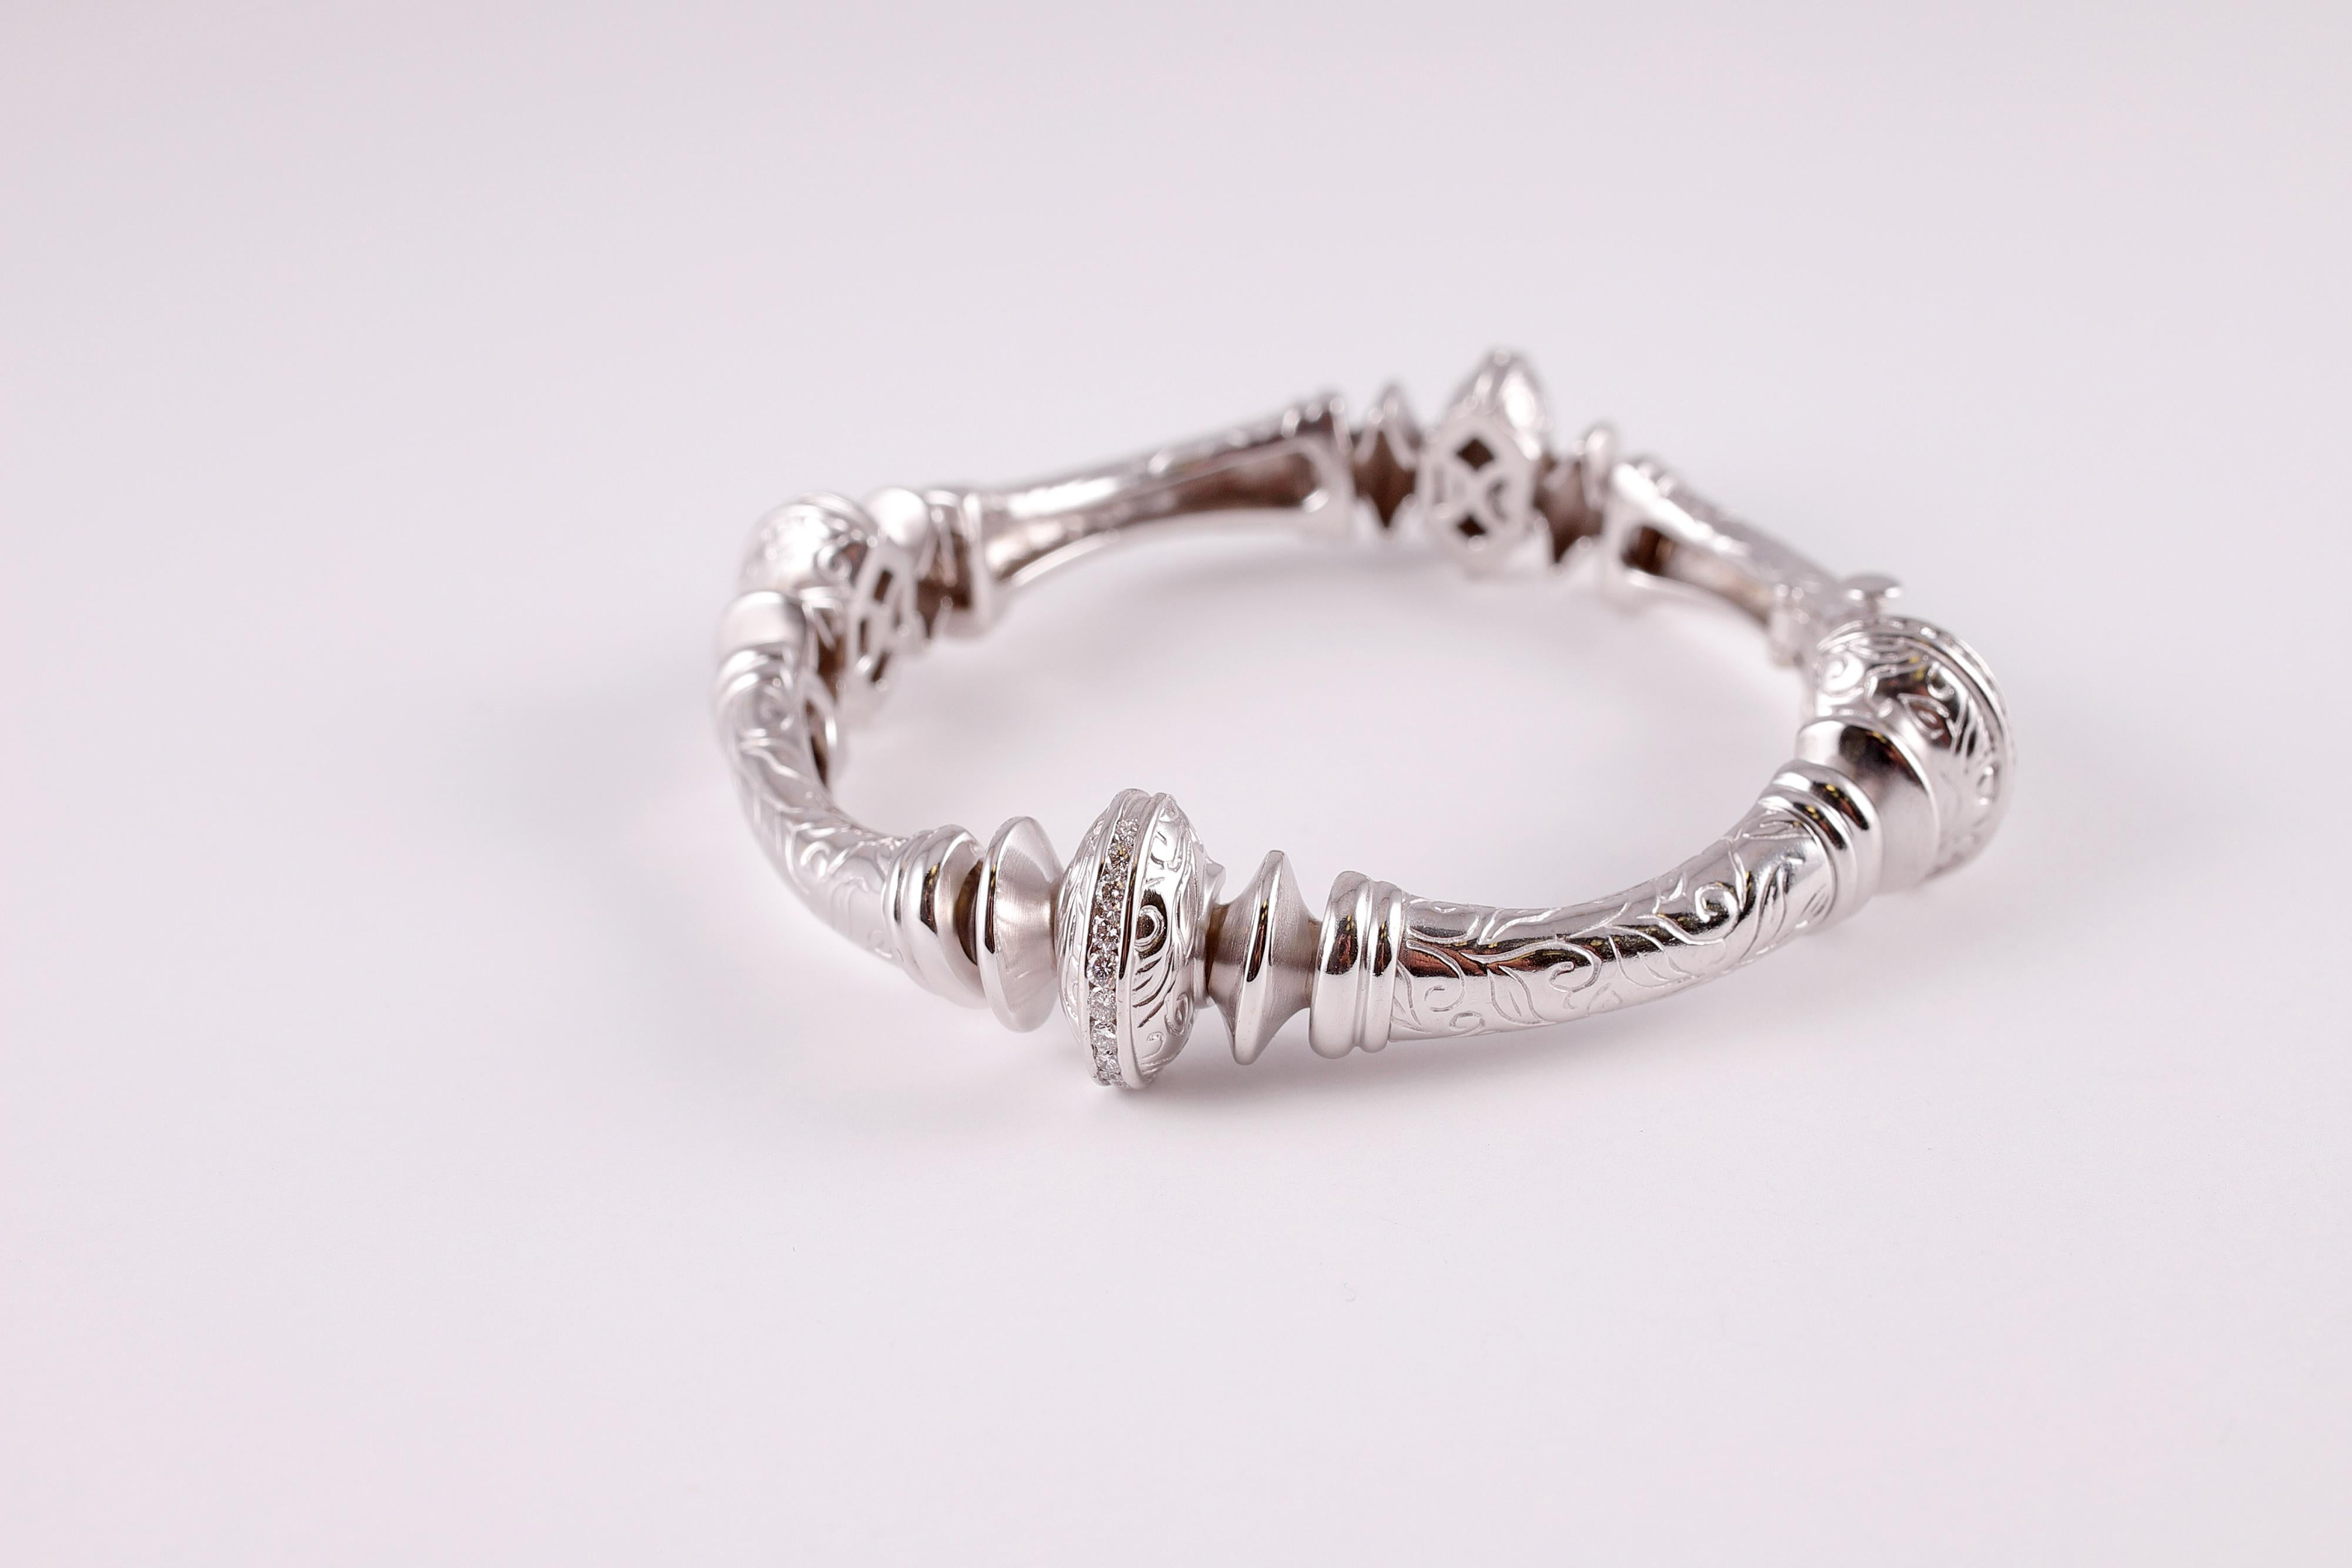 White Gold Diamond Bracelet by Seidengang from the Laurel Collection 1